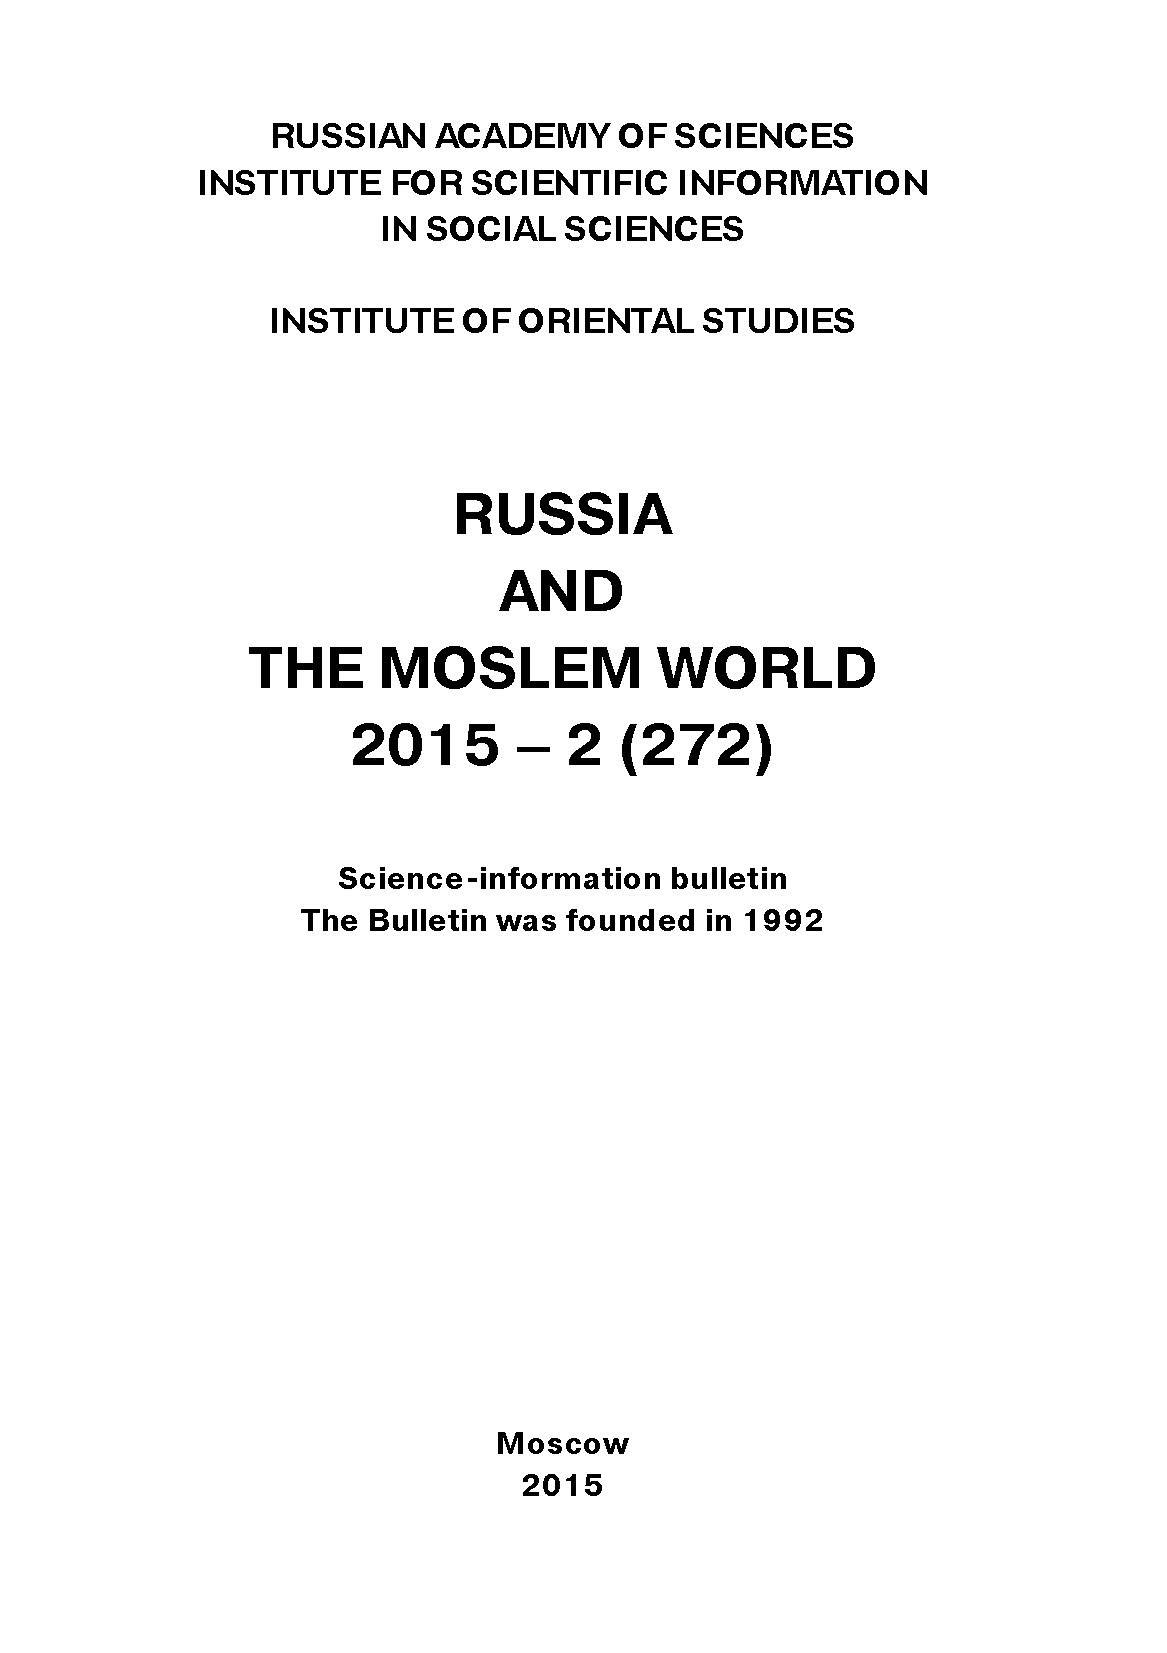 Russia and the Moslem World№ 02 / 2015